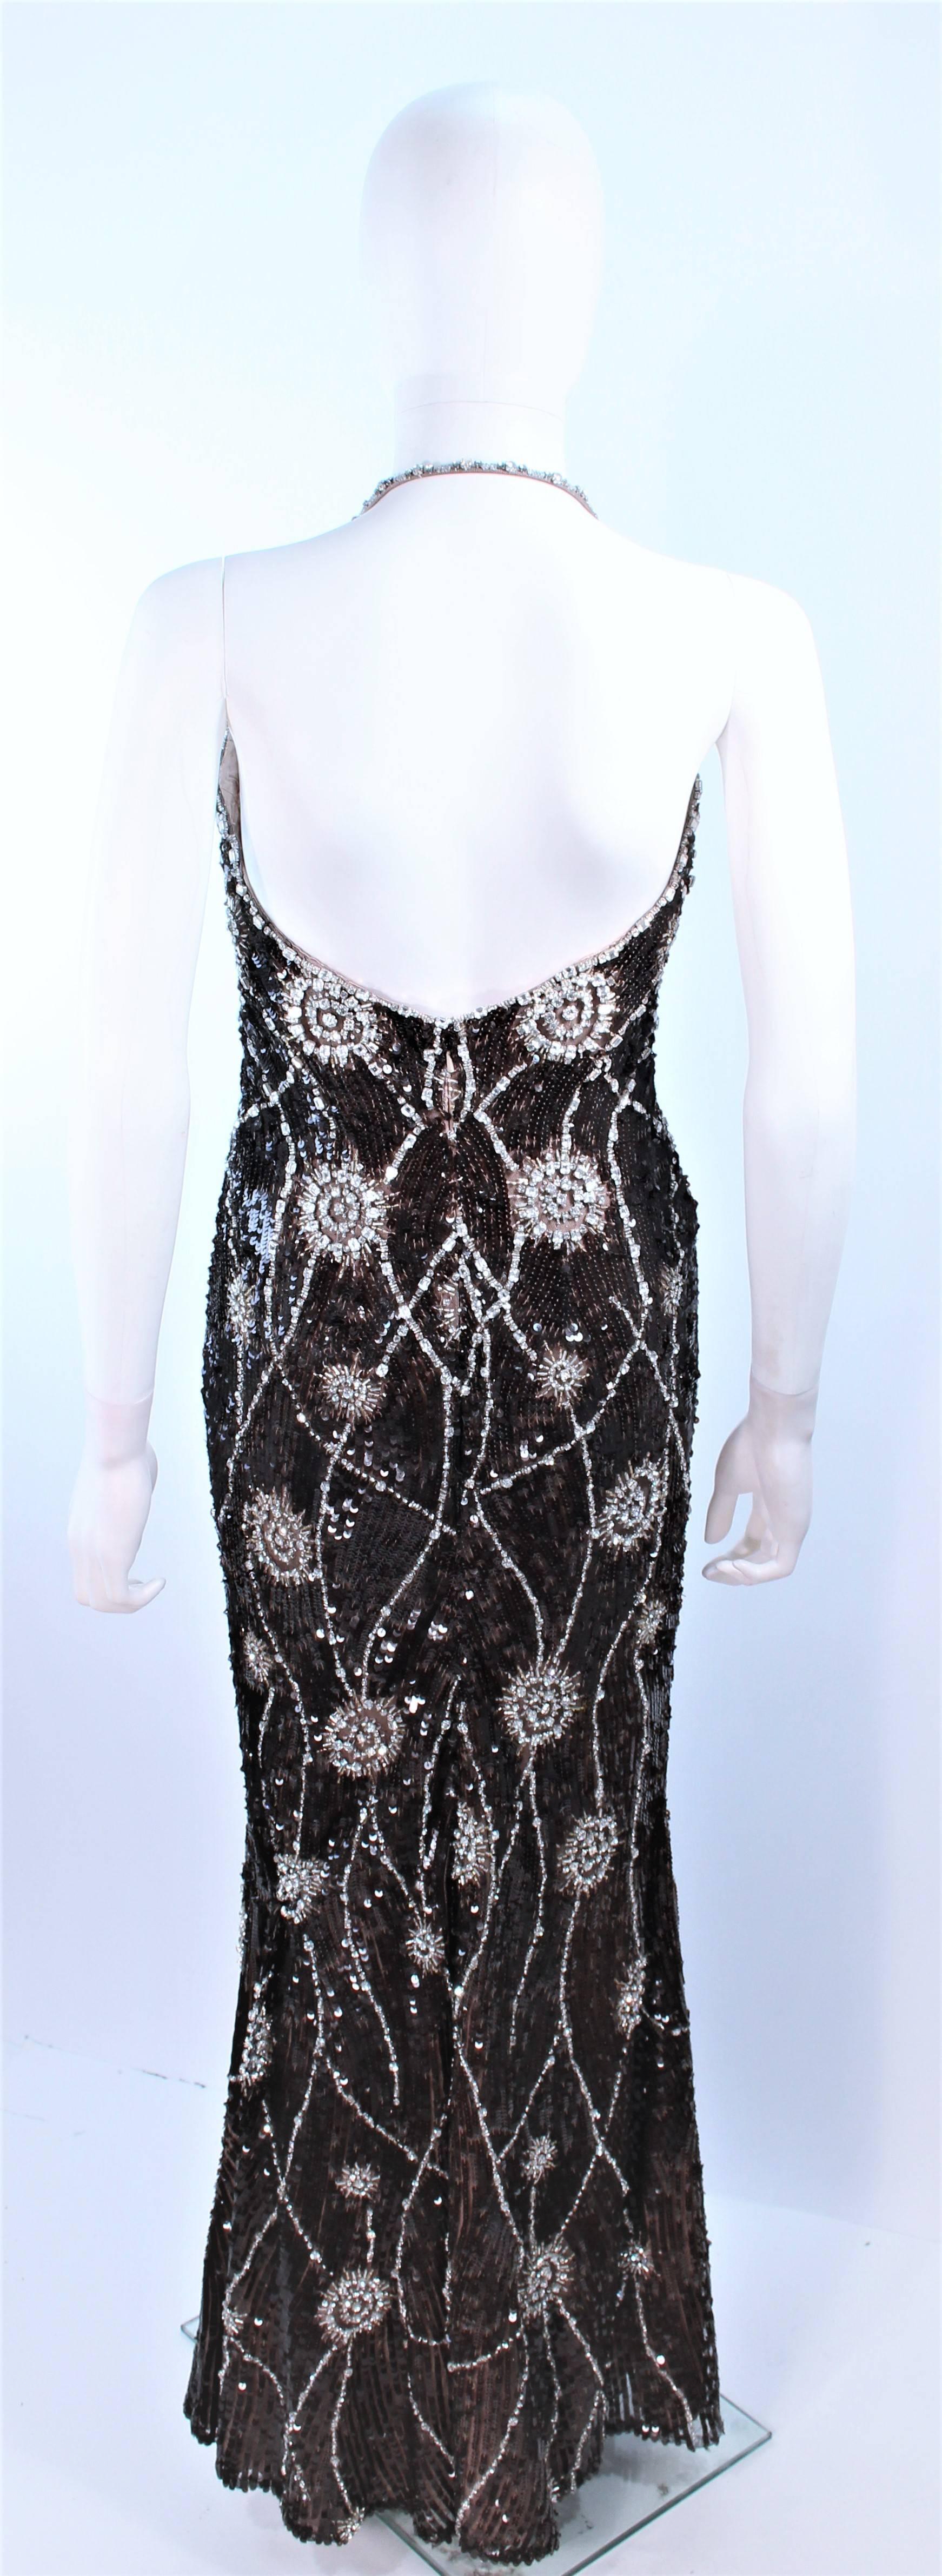 STEPHEN YEARIK Brown Sequin Rhinestone Floral Embellished Halter Gown Size 4 For Sale 3